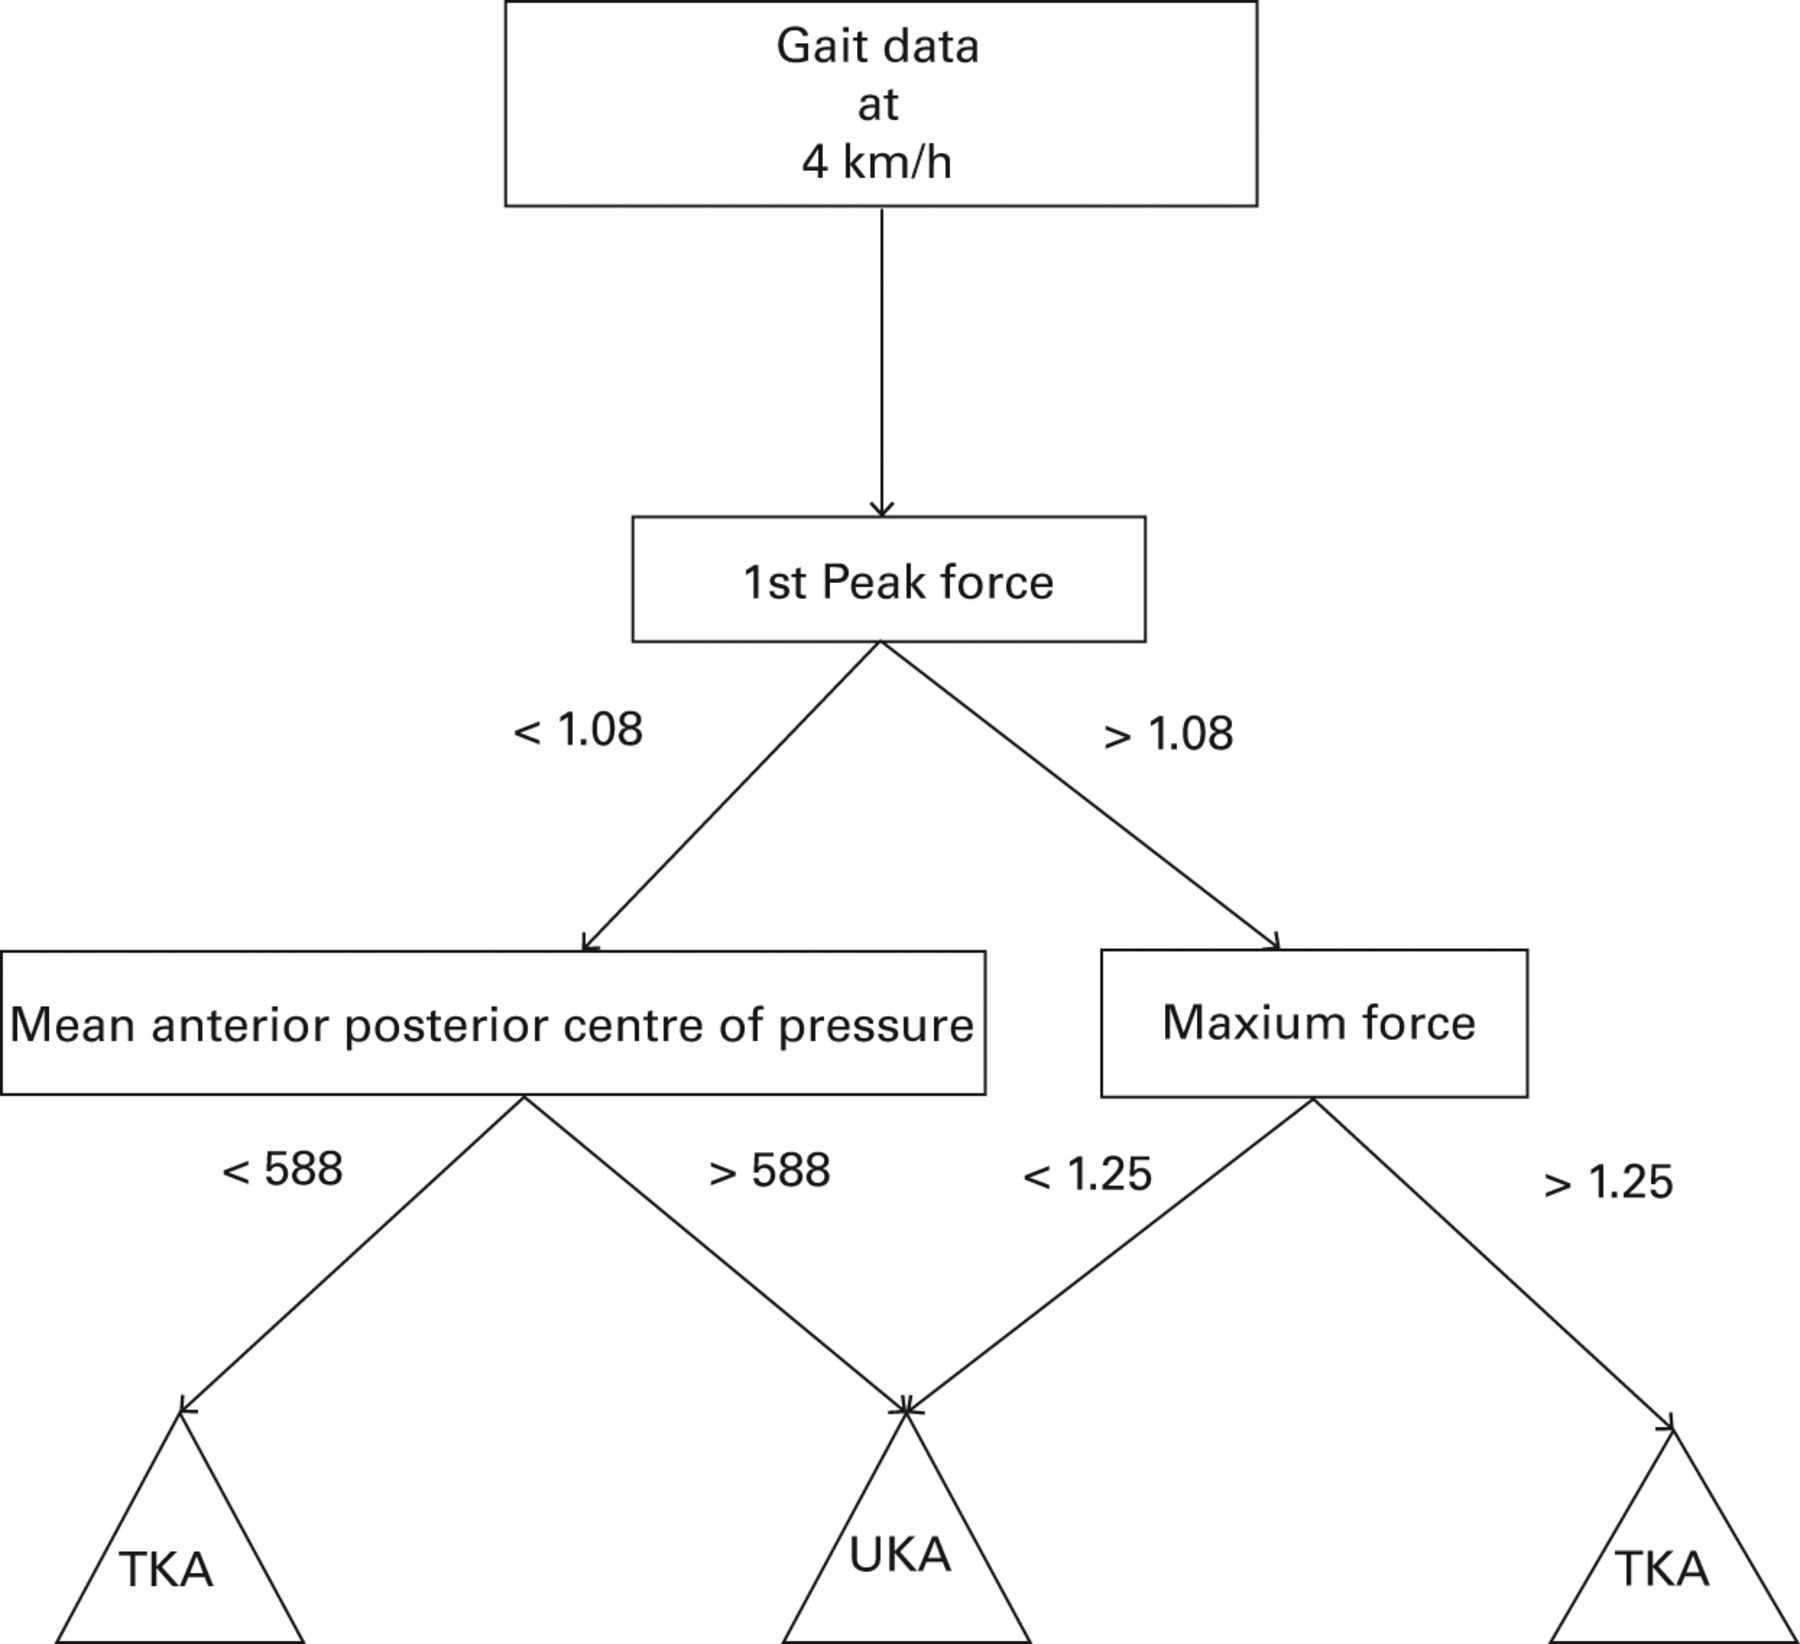 Fig. 1 
          Decision tree at 4 km/h trained with
unicompartmental and total knee arthroplasty (UKA and TKA) data
to classify gait in a binary fashion. First peak force and maximum
force (normalised, therefore dimensionless), and mean anteroposterior centre
of pressure (cm) values were selected by the algorithm. Gait data
from each healthy control at 4 km/h was then processed by this decision
tree, and classified as either a UKA or TKA. This was repeated at
all eight walking speeds.
        